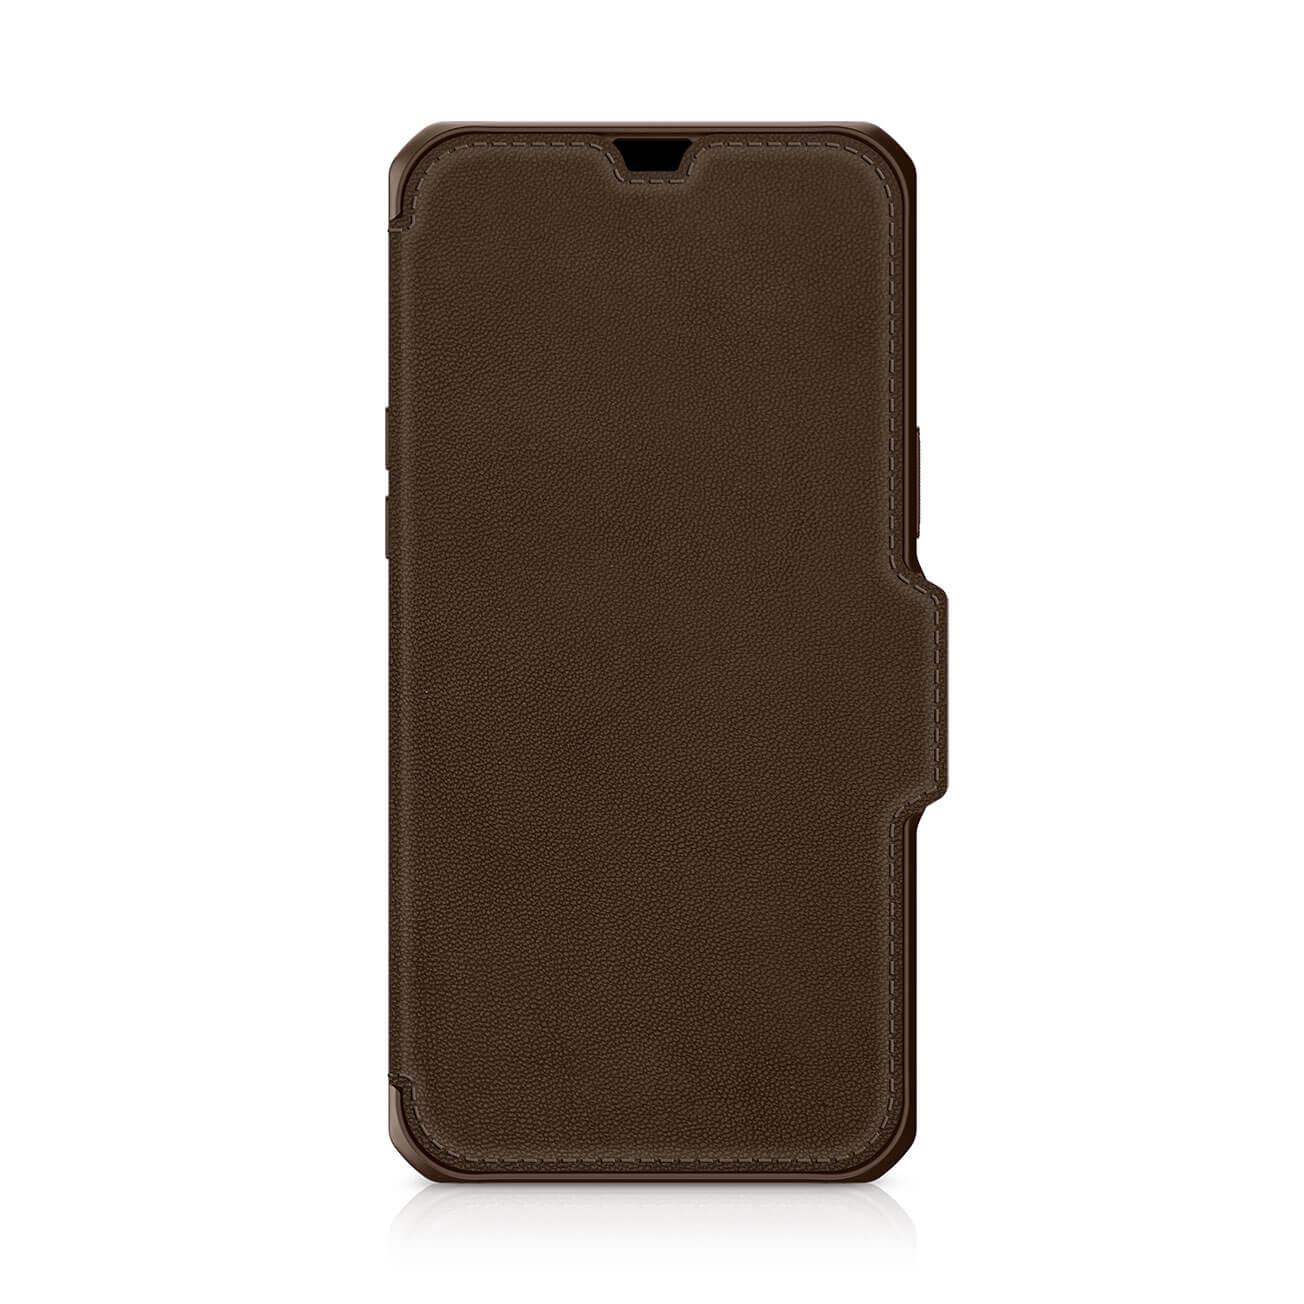 ITSKINS - Hybrid Folio Leather for iPhone 13 [ Brown with real leather ]